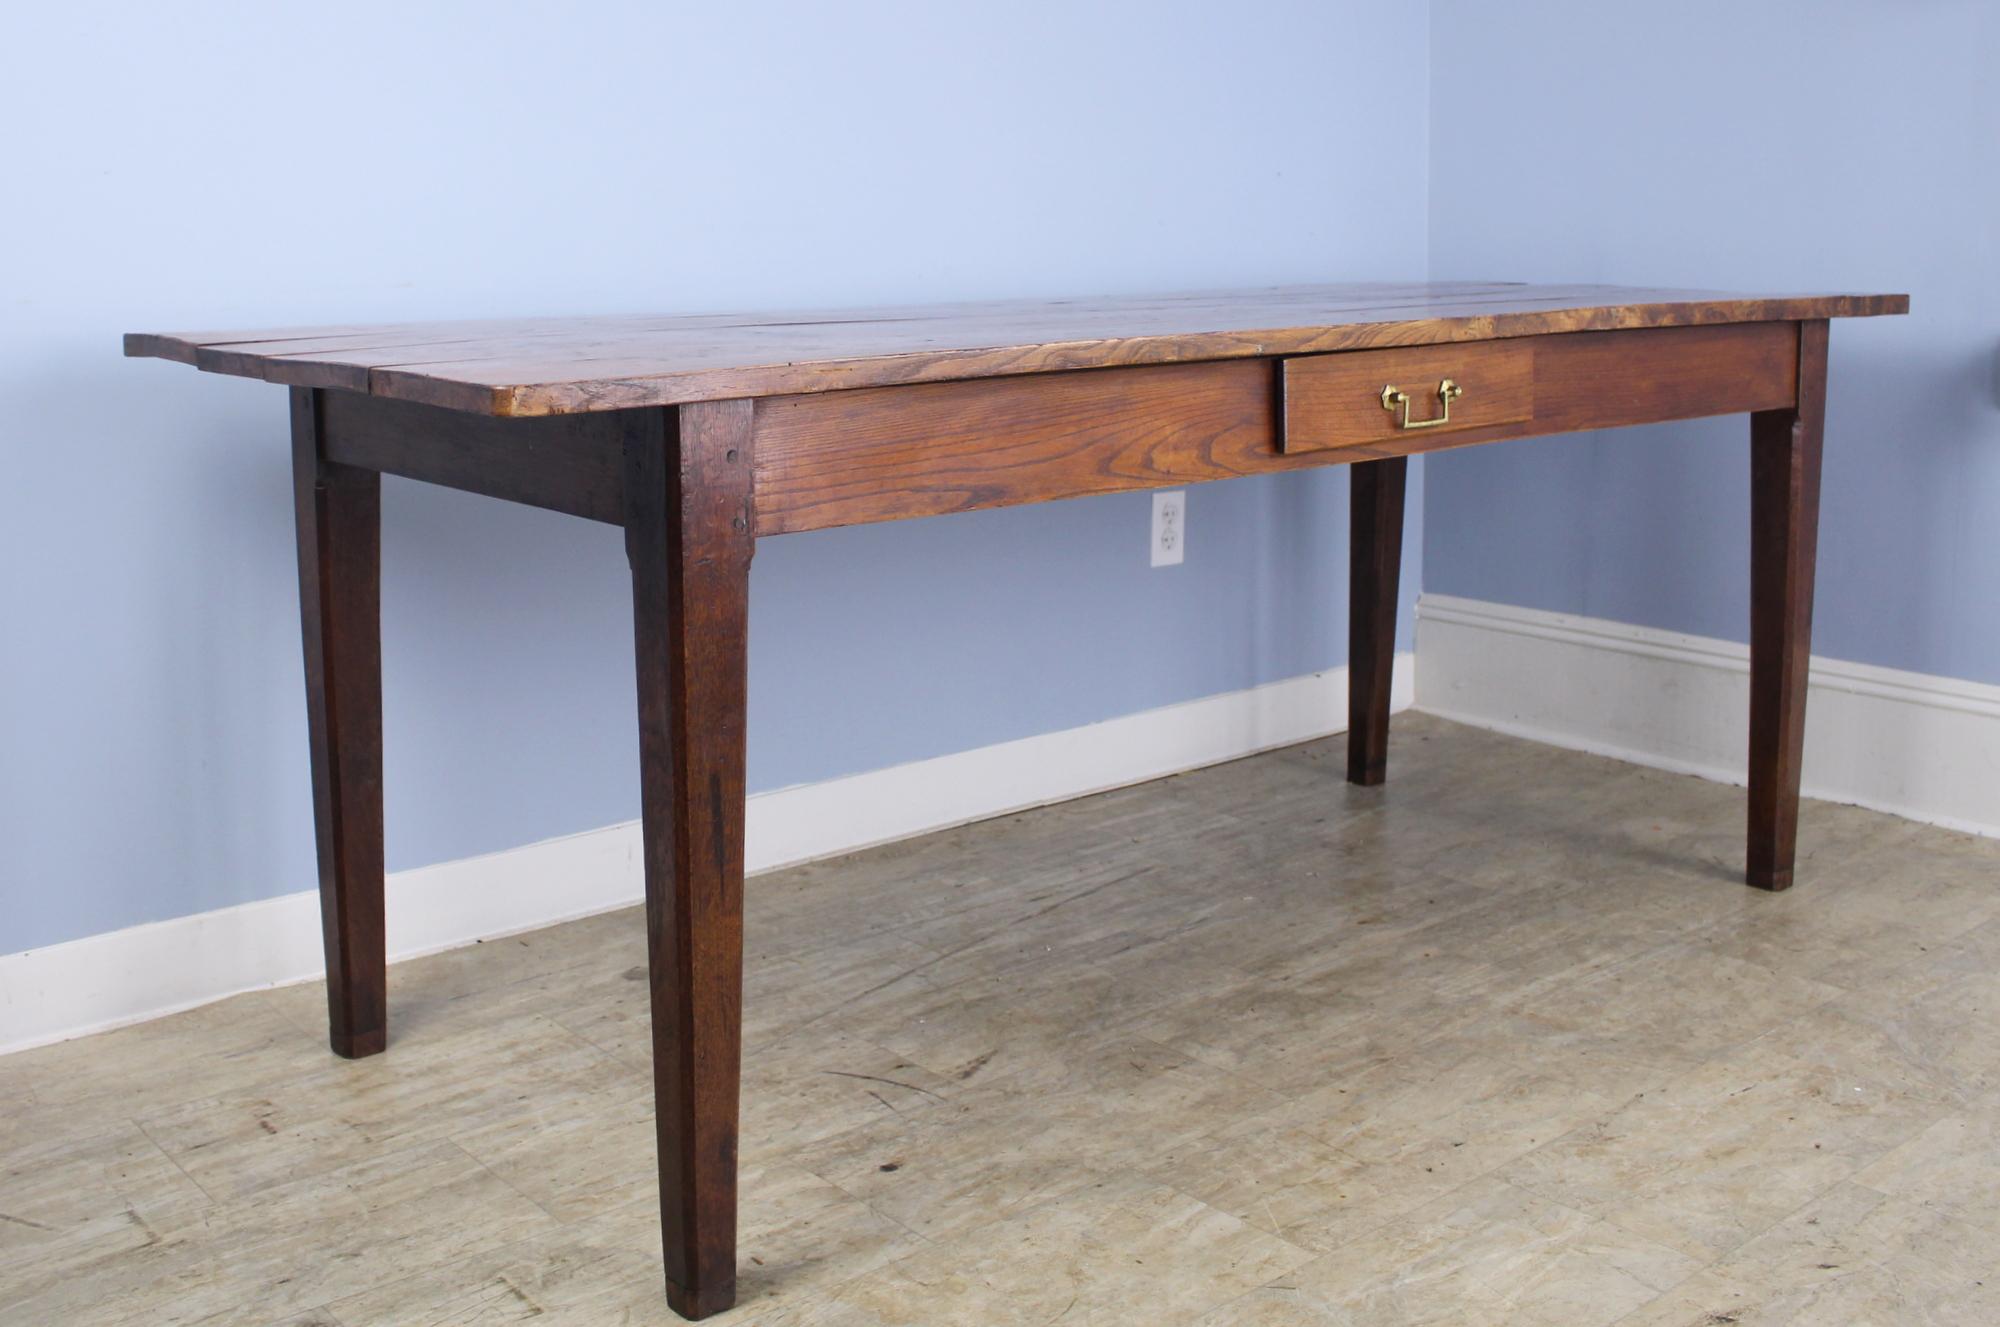 A handsome elm dining table or farm table with elegant tapered legs and a useful and decorative drawer. Handle has been replaced.
The top has lovely color, grain and patina. 24.5 inch apron height is good for knees and there are 61 inches between